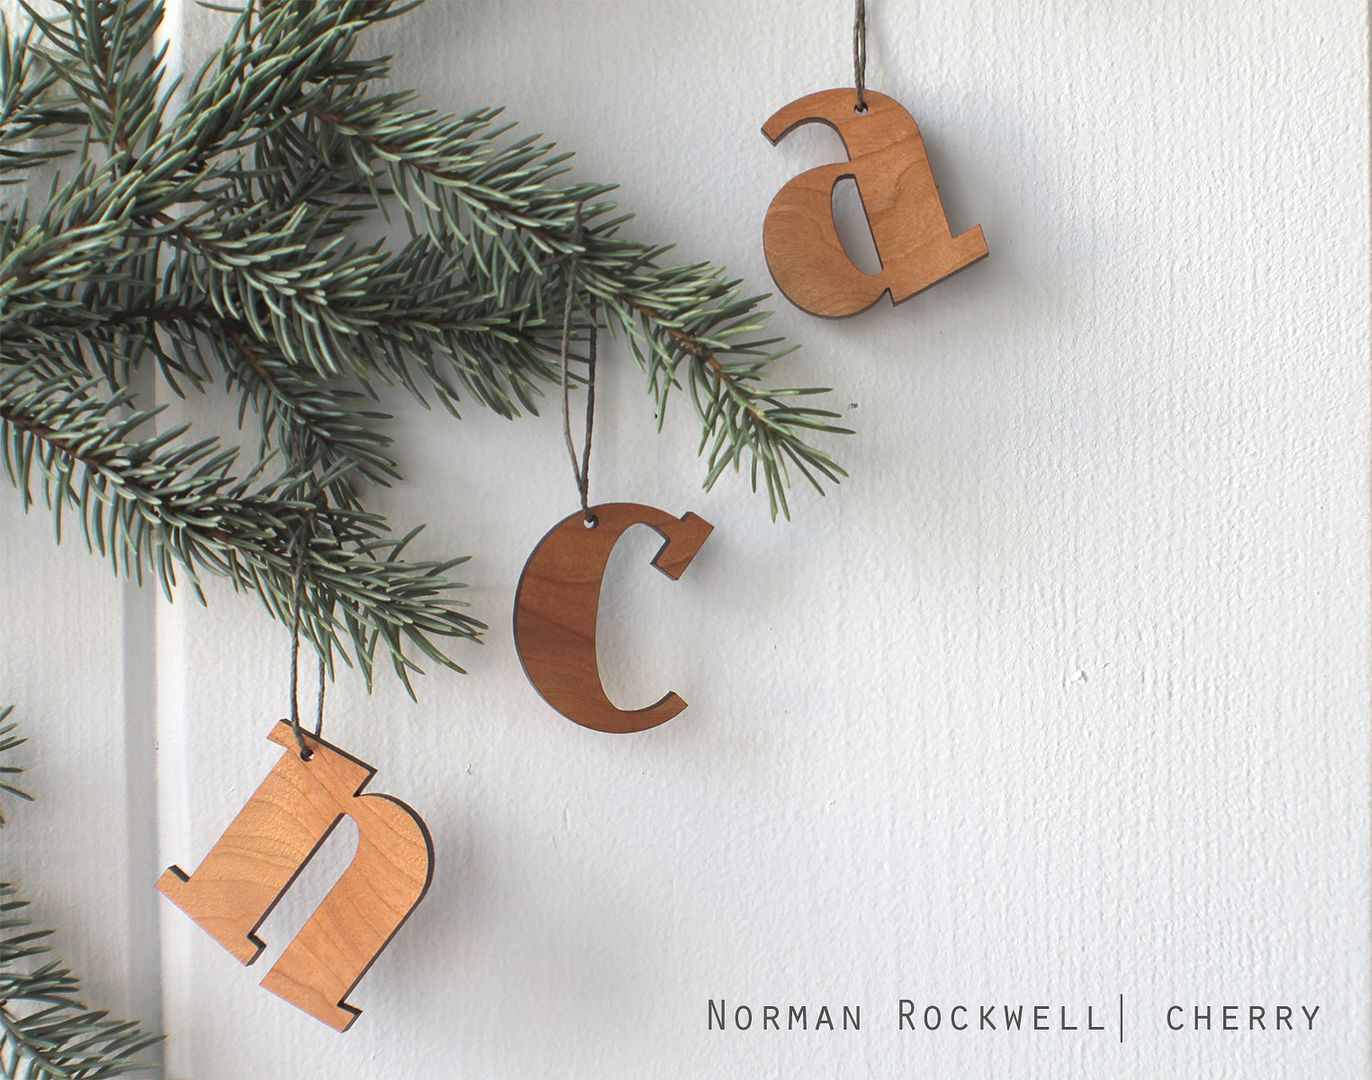 Personalized initial ornaments: Creative stocking stuffers for kids